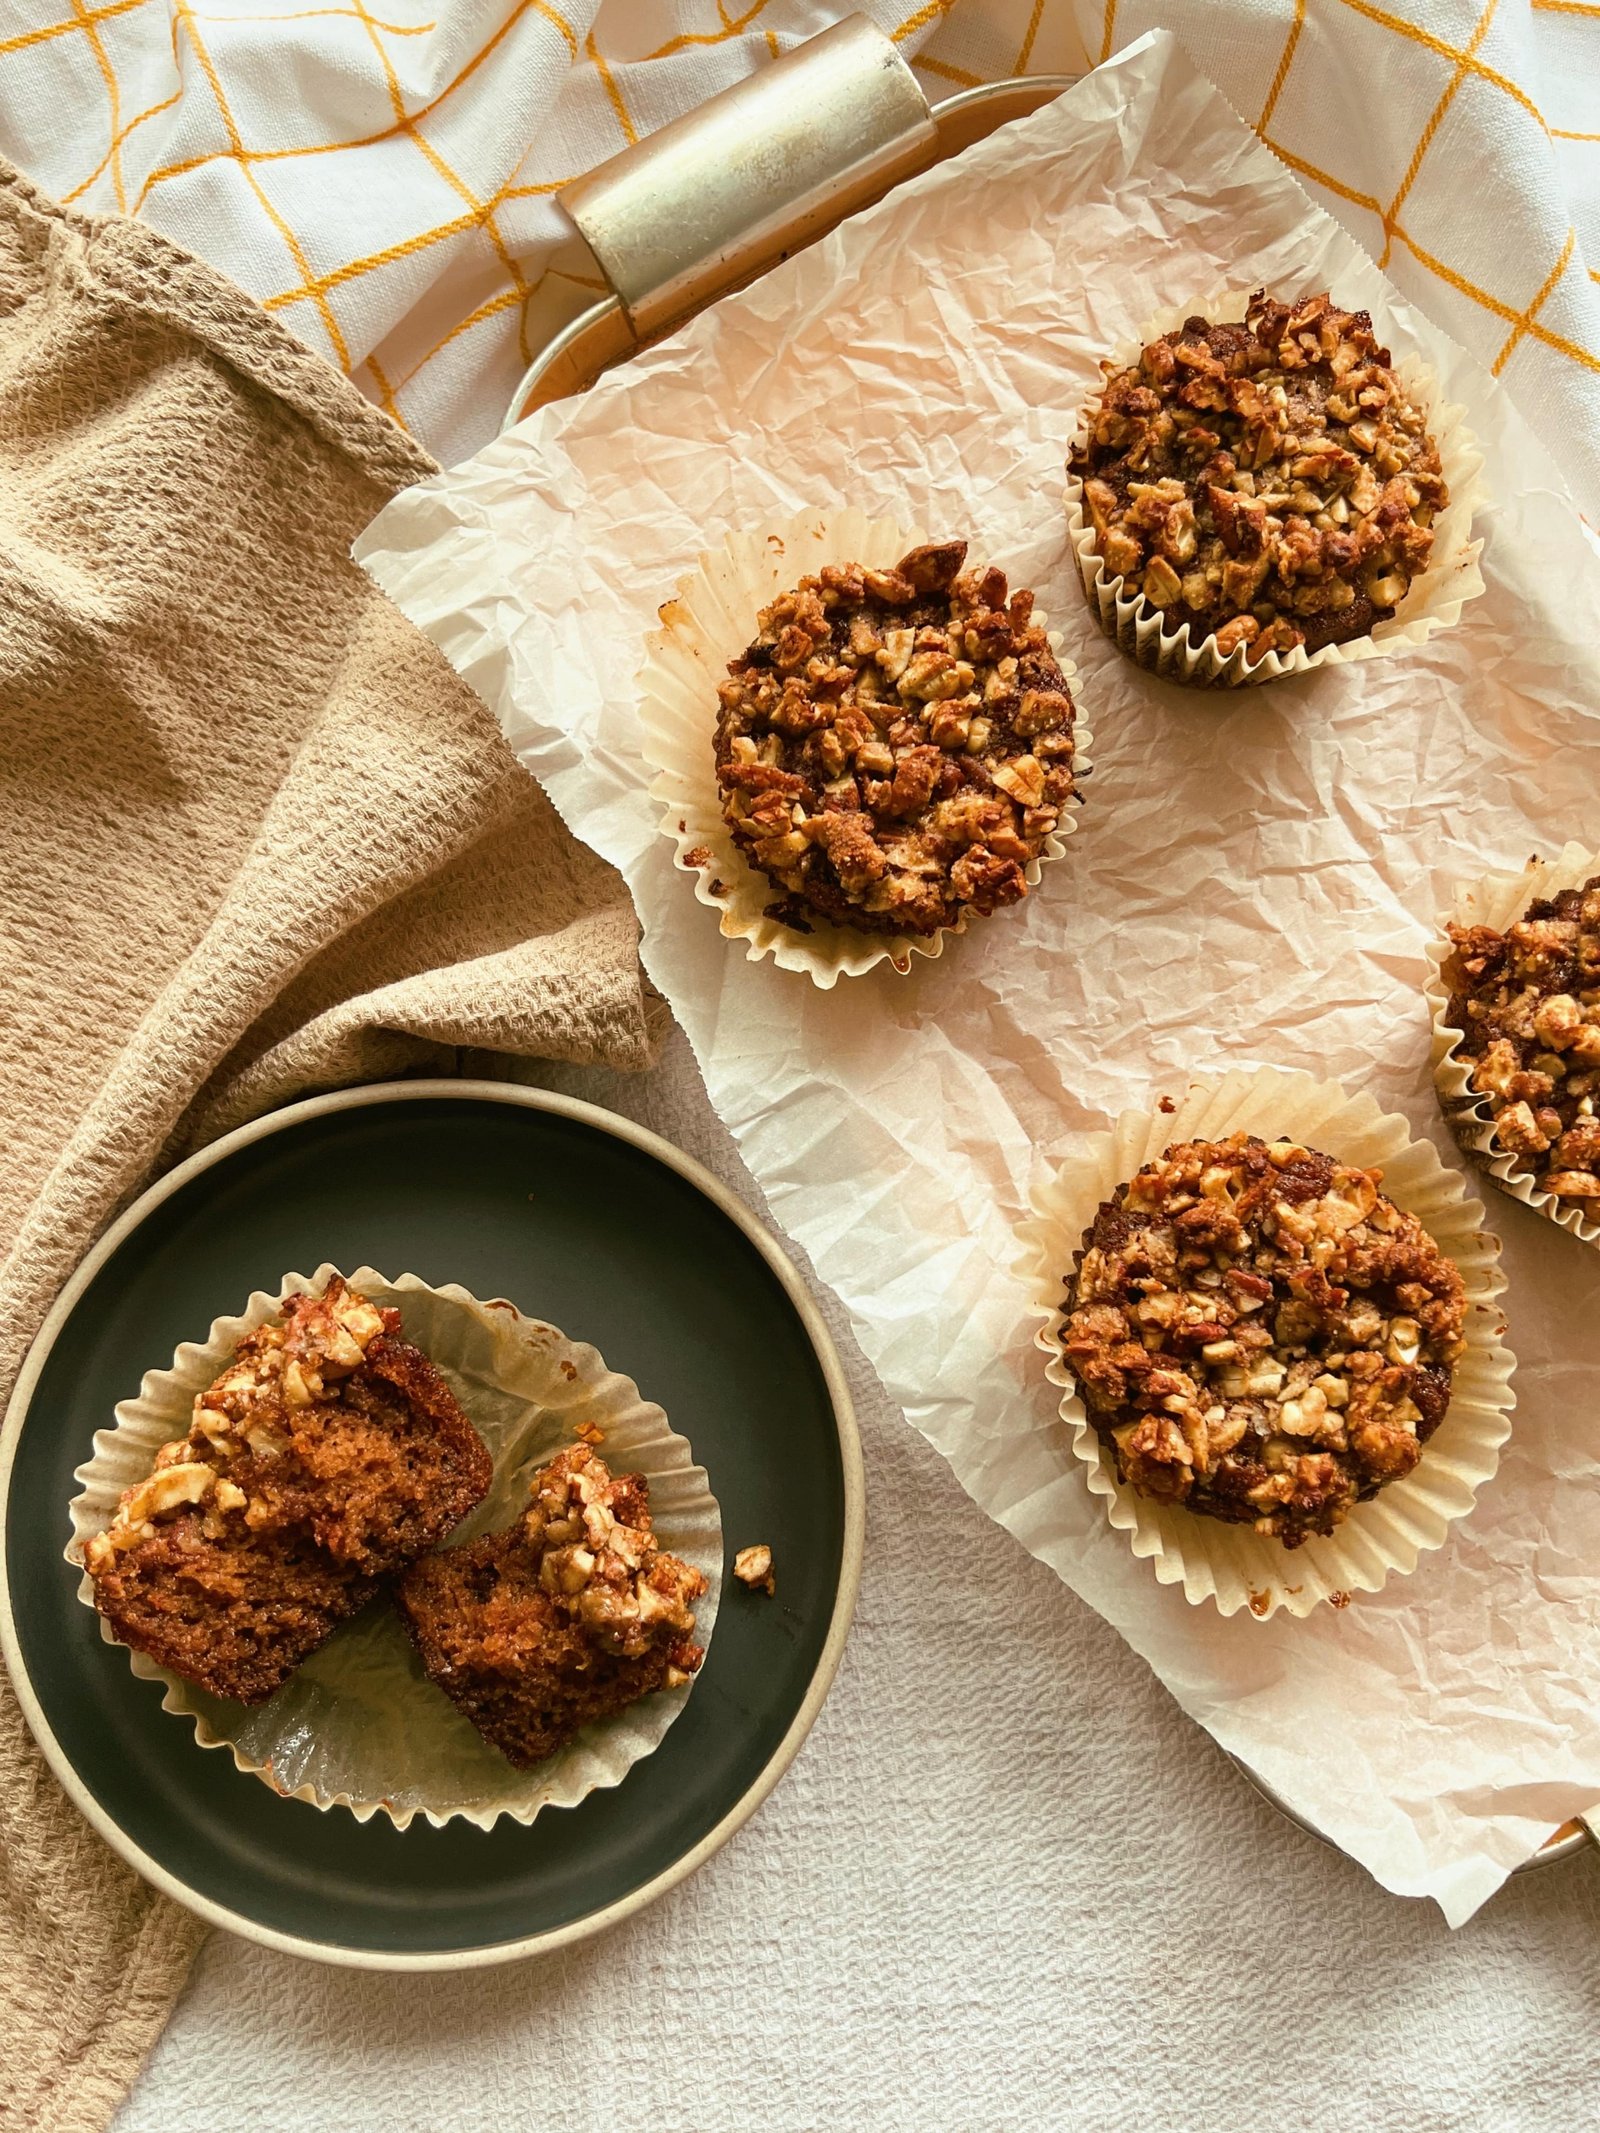 STRAWBERRY HONEY-INFUSED MUFFINS WITH GRANOLA CRUMB TOPPING (GRAIN FREE, SCD DIET)